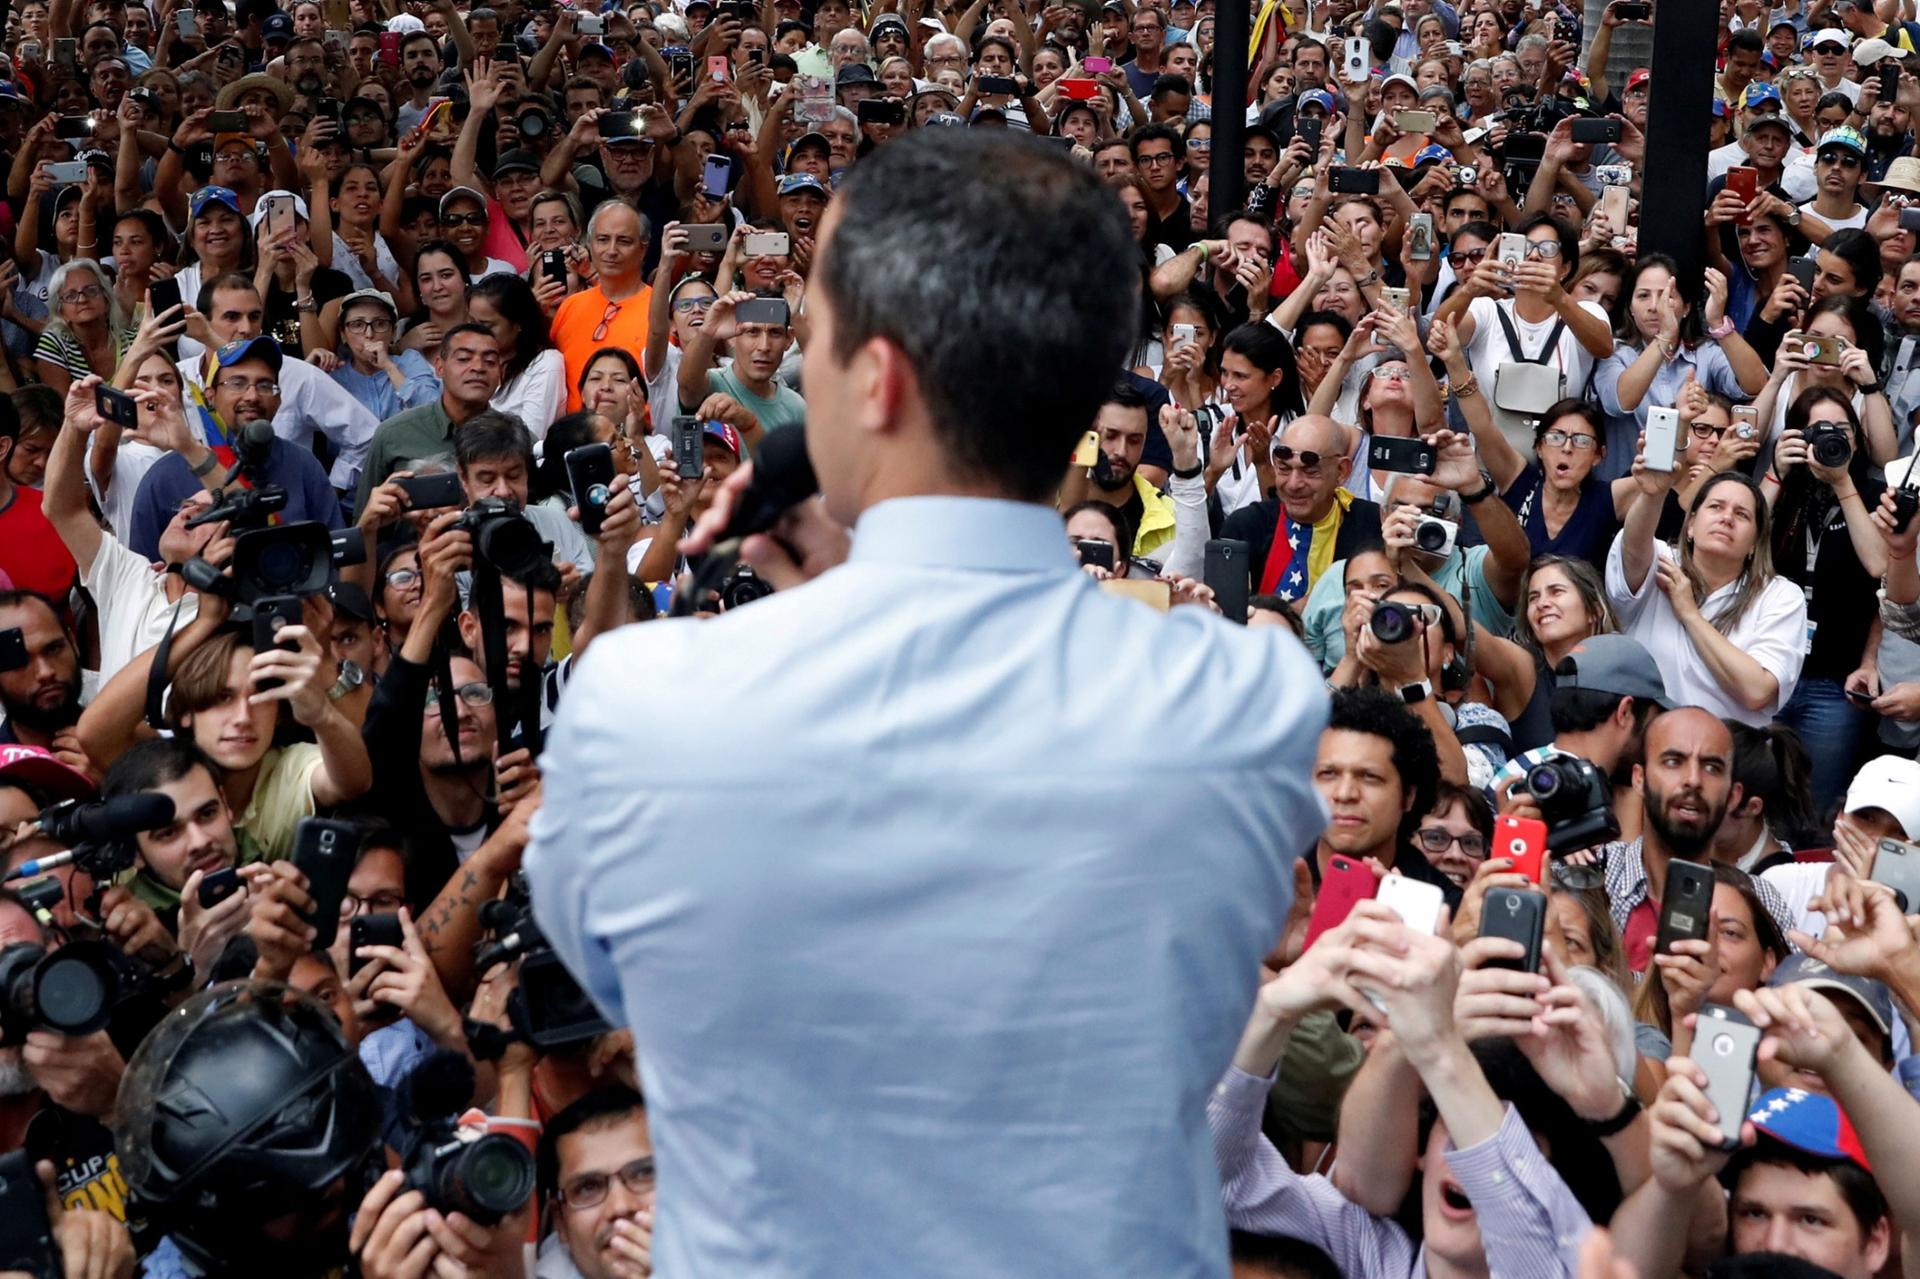 Venezuelan opposition leader Juan Guaidó is shown from behind while looking out on a large crowd.